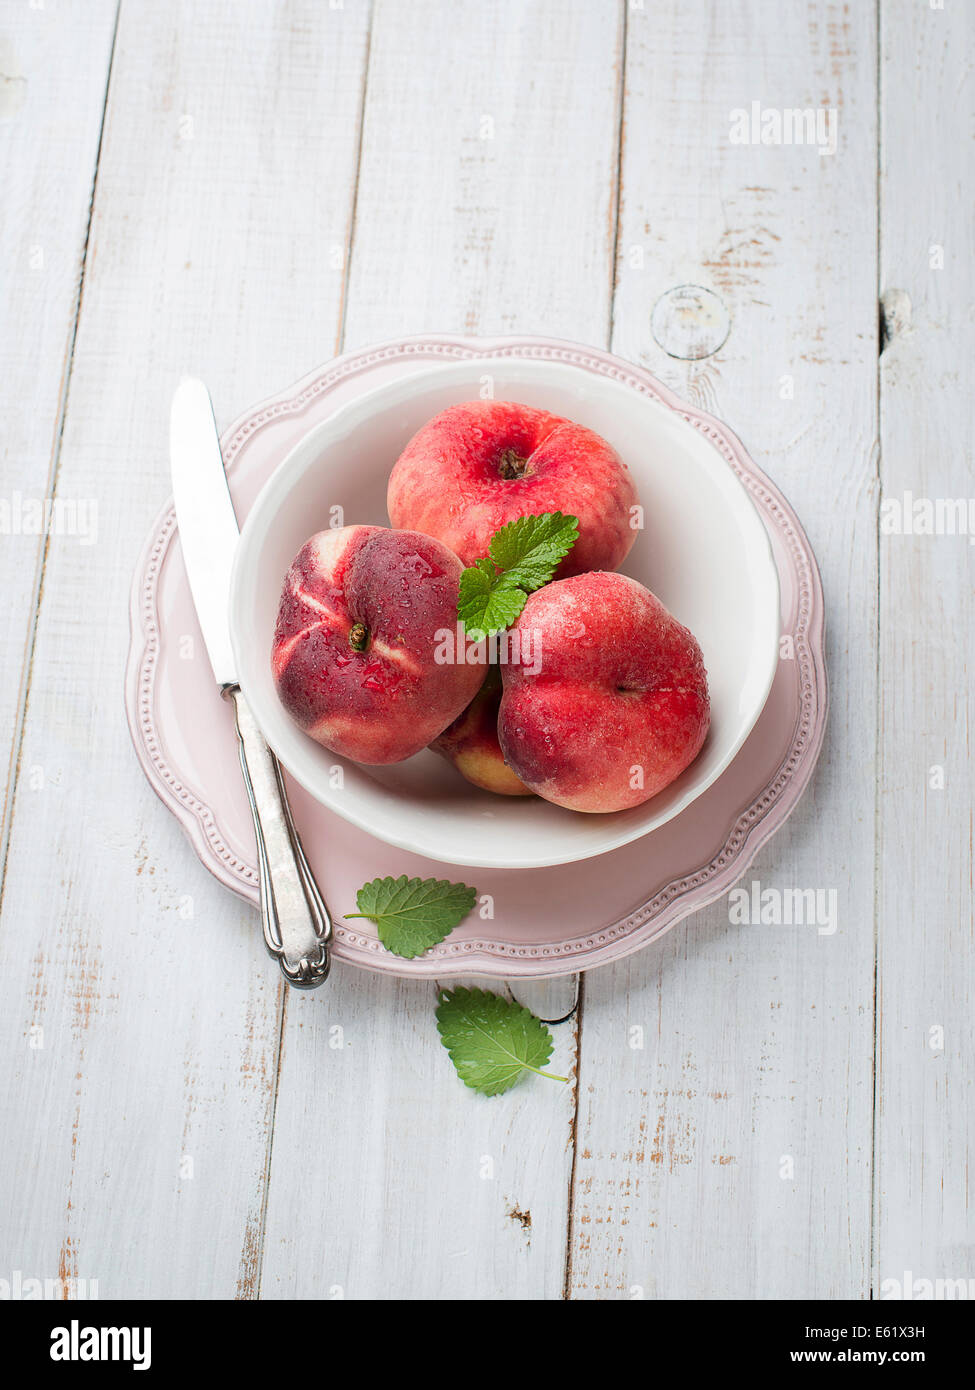 Ripe juicy chinese flat peaches (also called Saturn peaches) Stock Photo